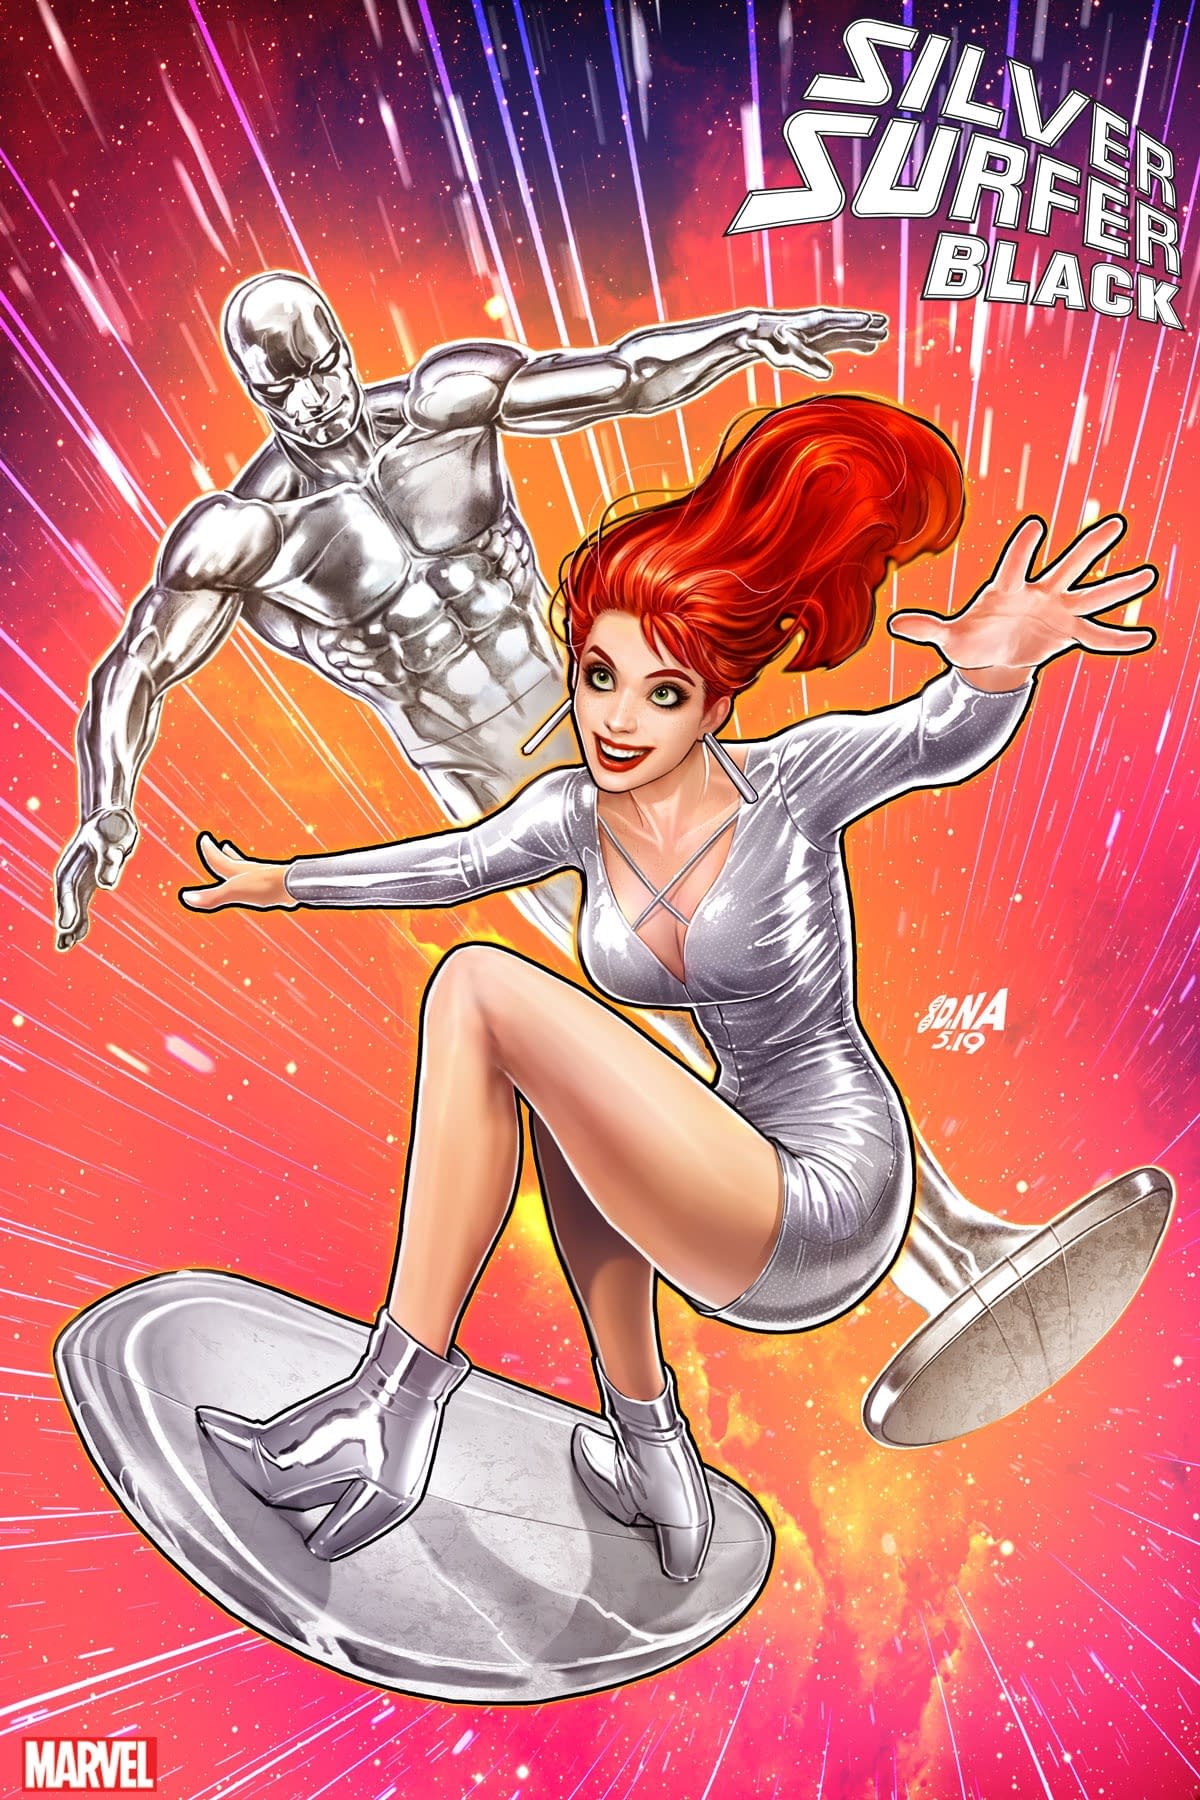 Marvel Demonstrates Commitment to Mary Jane Series with 24 Variants